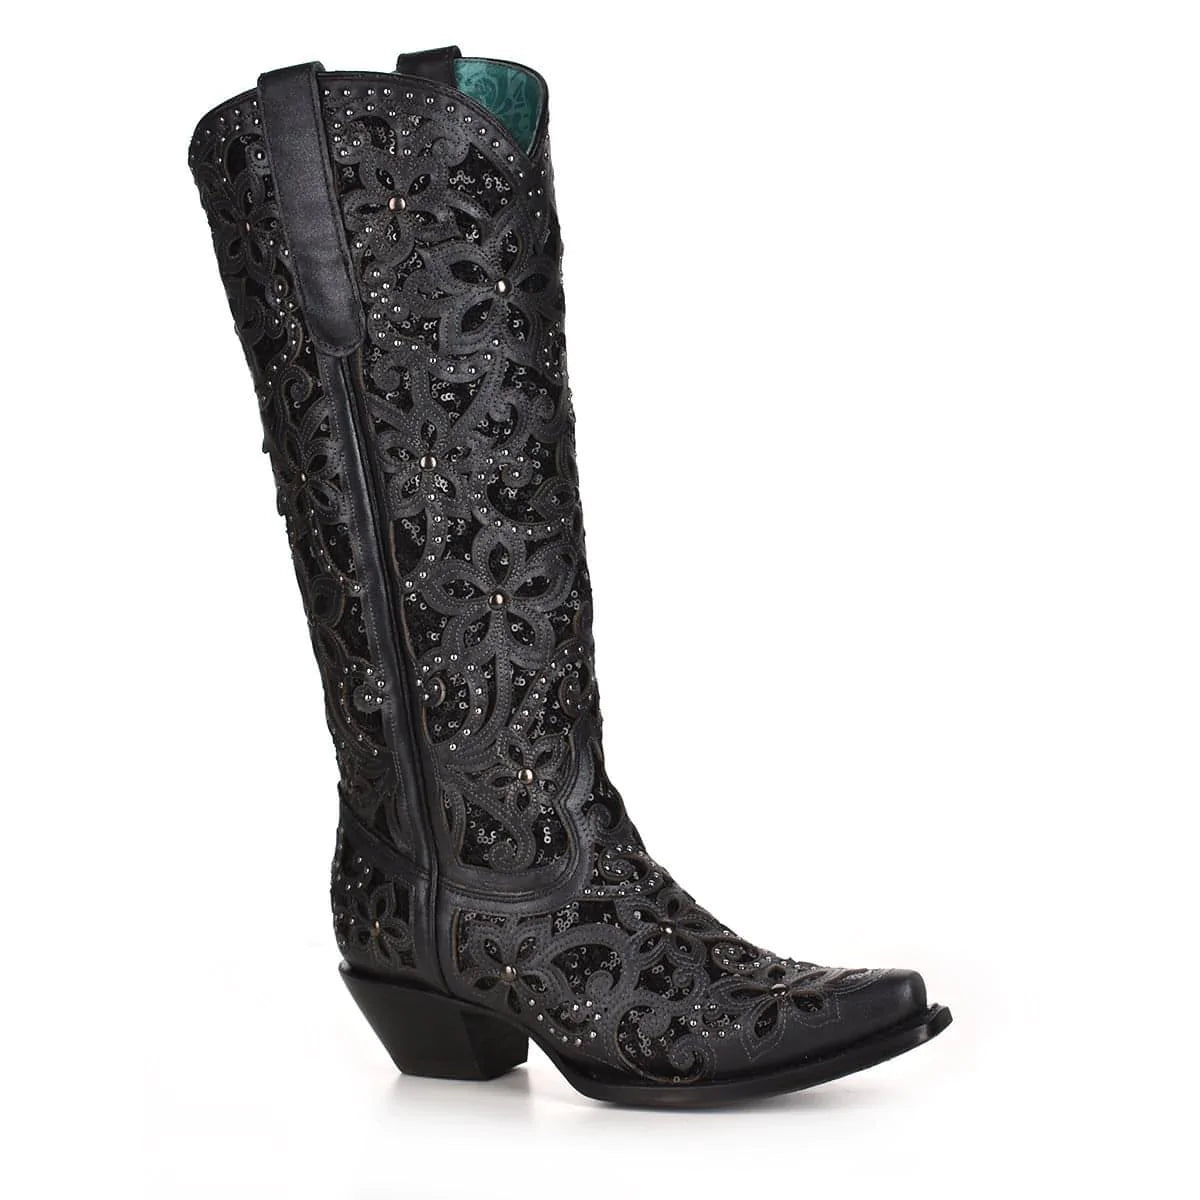 The Jenny Corral Boots